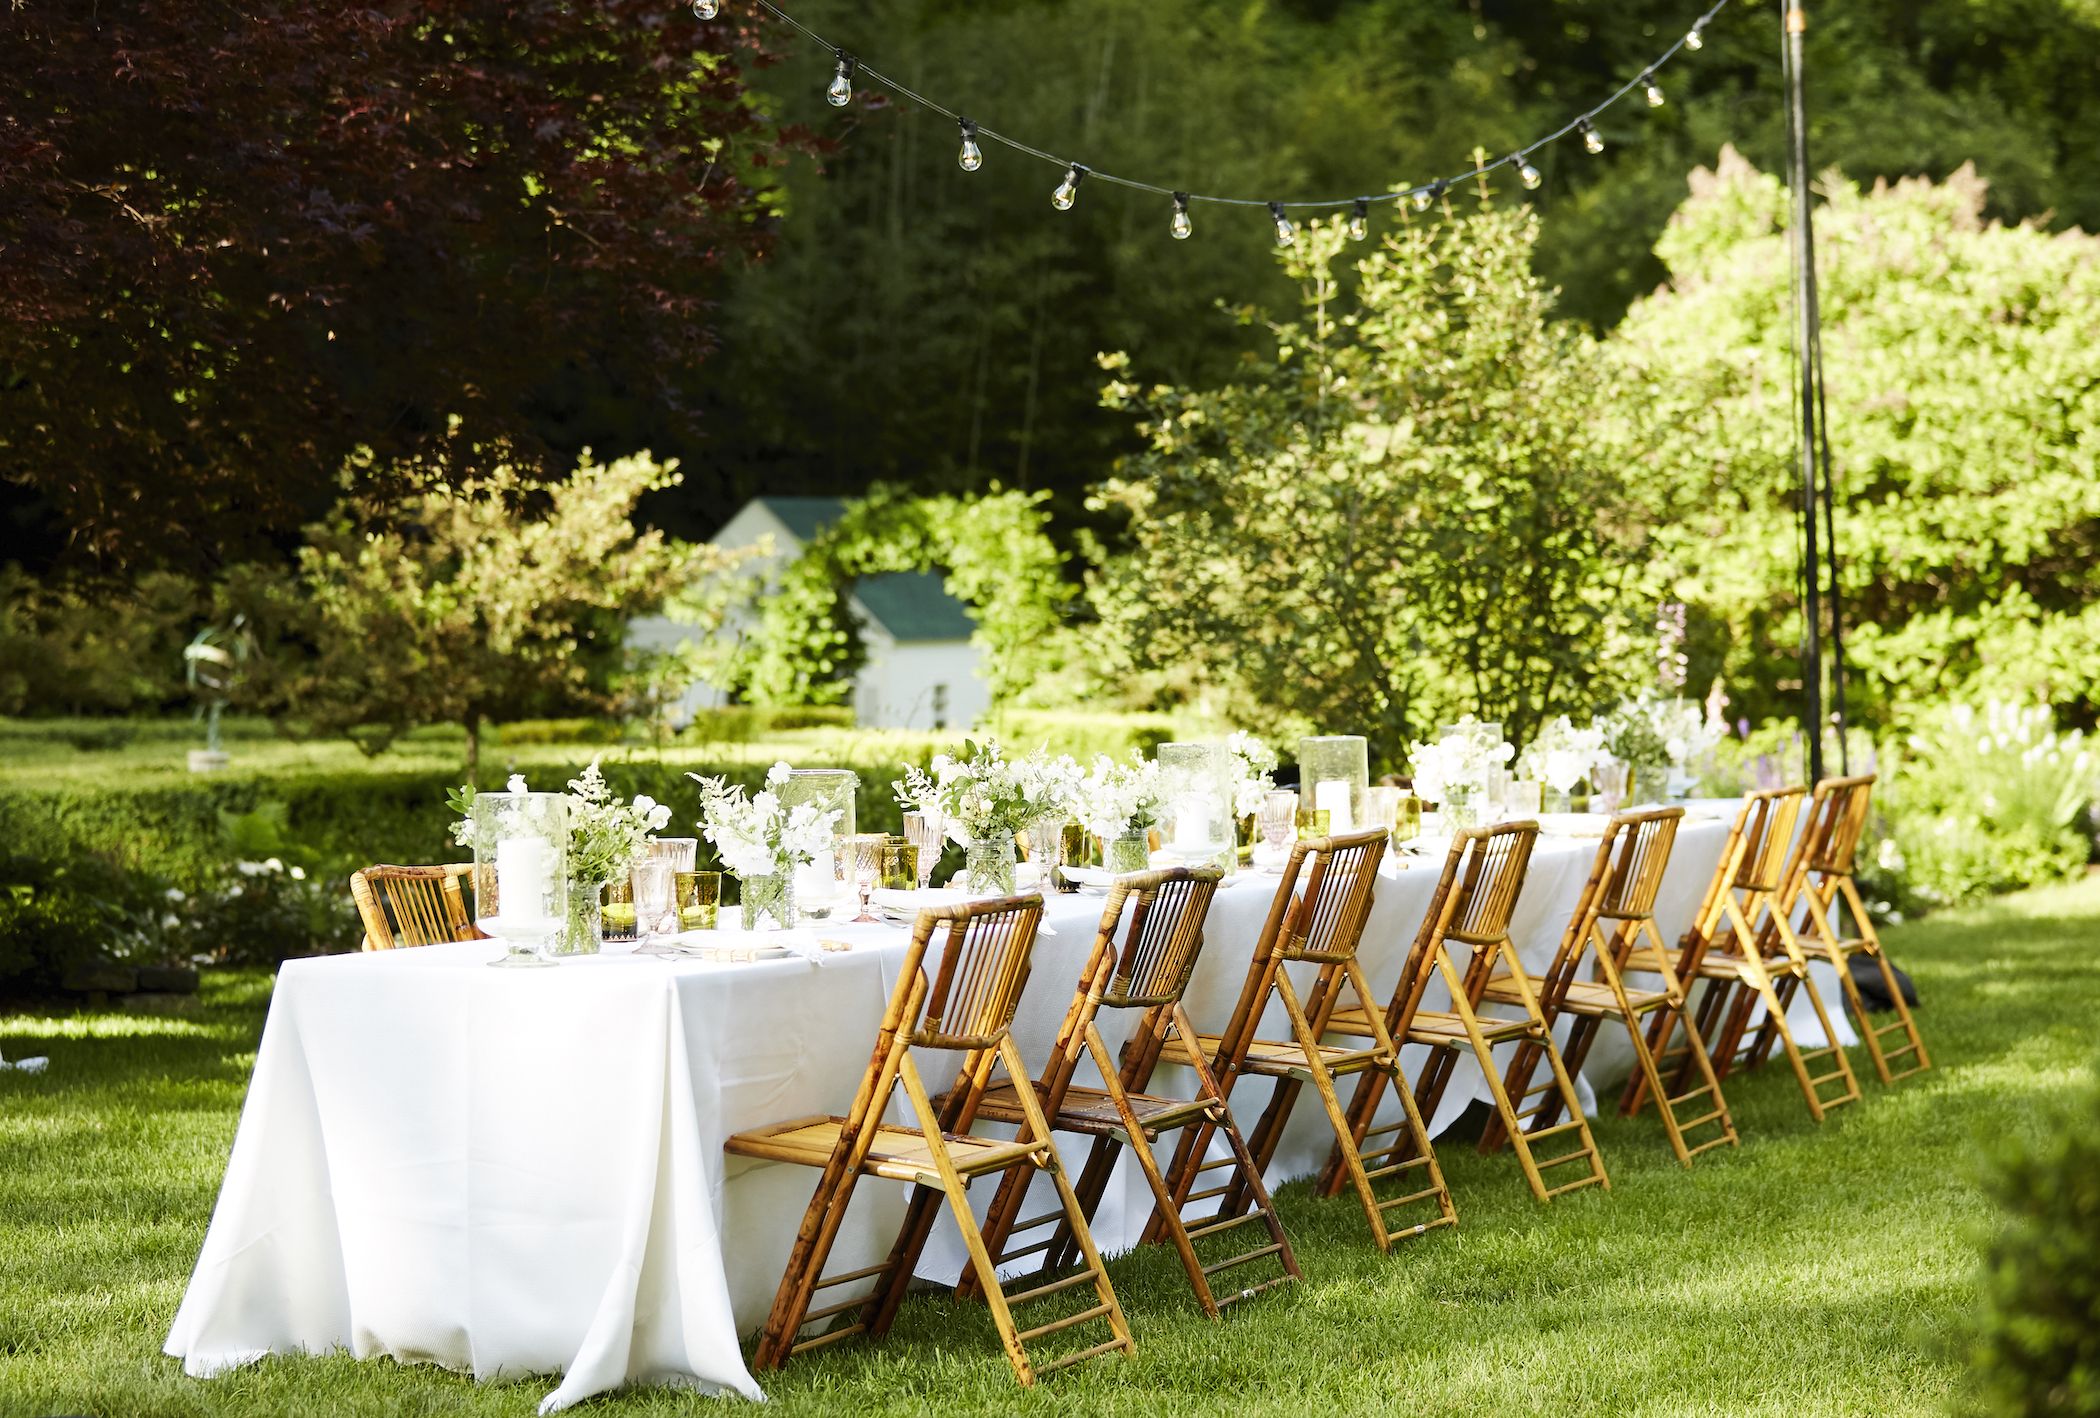 outdoor party decorations ideas